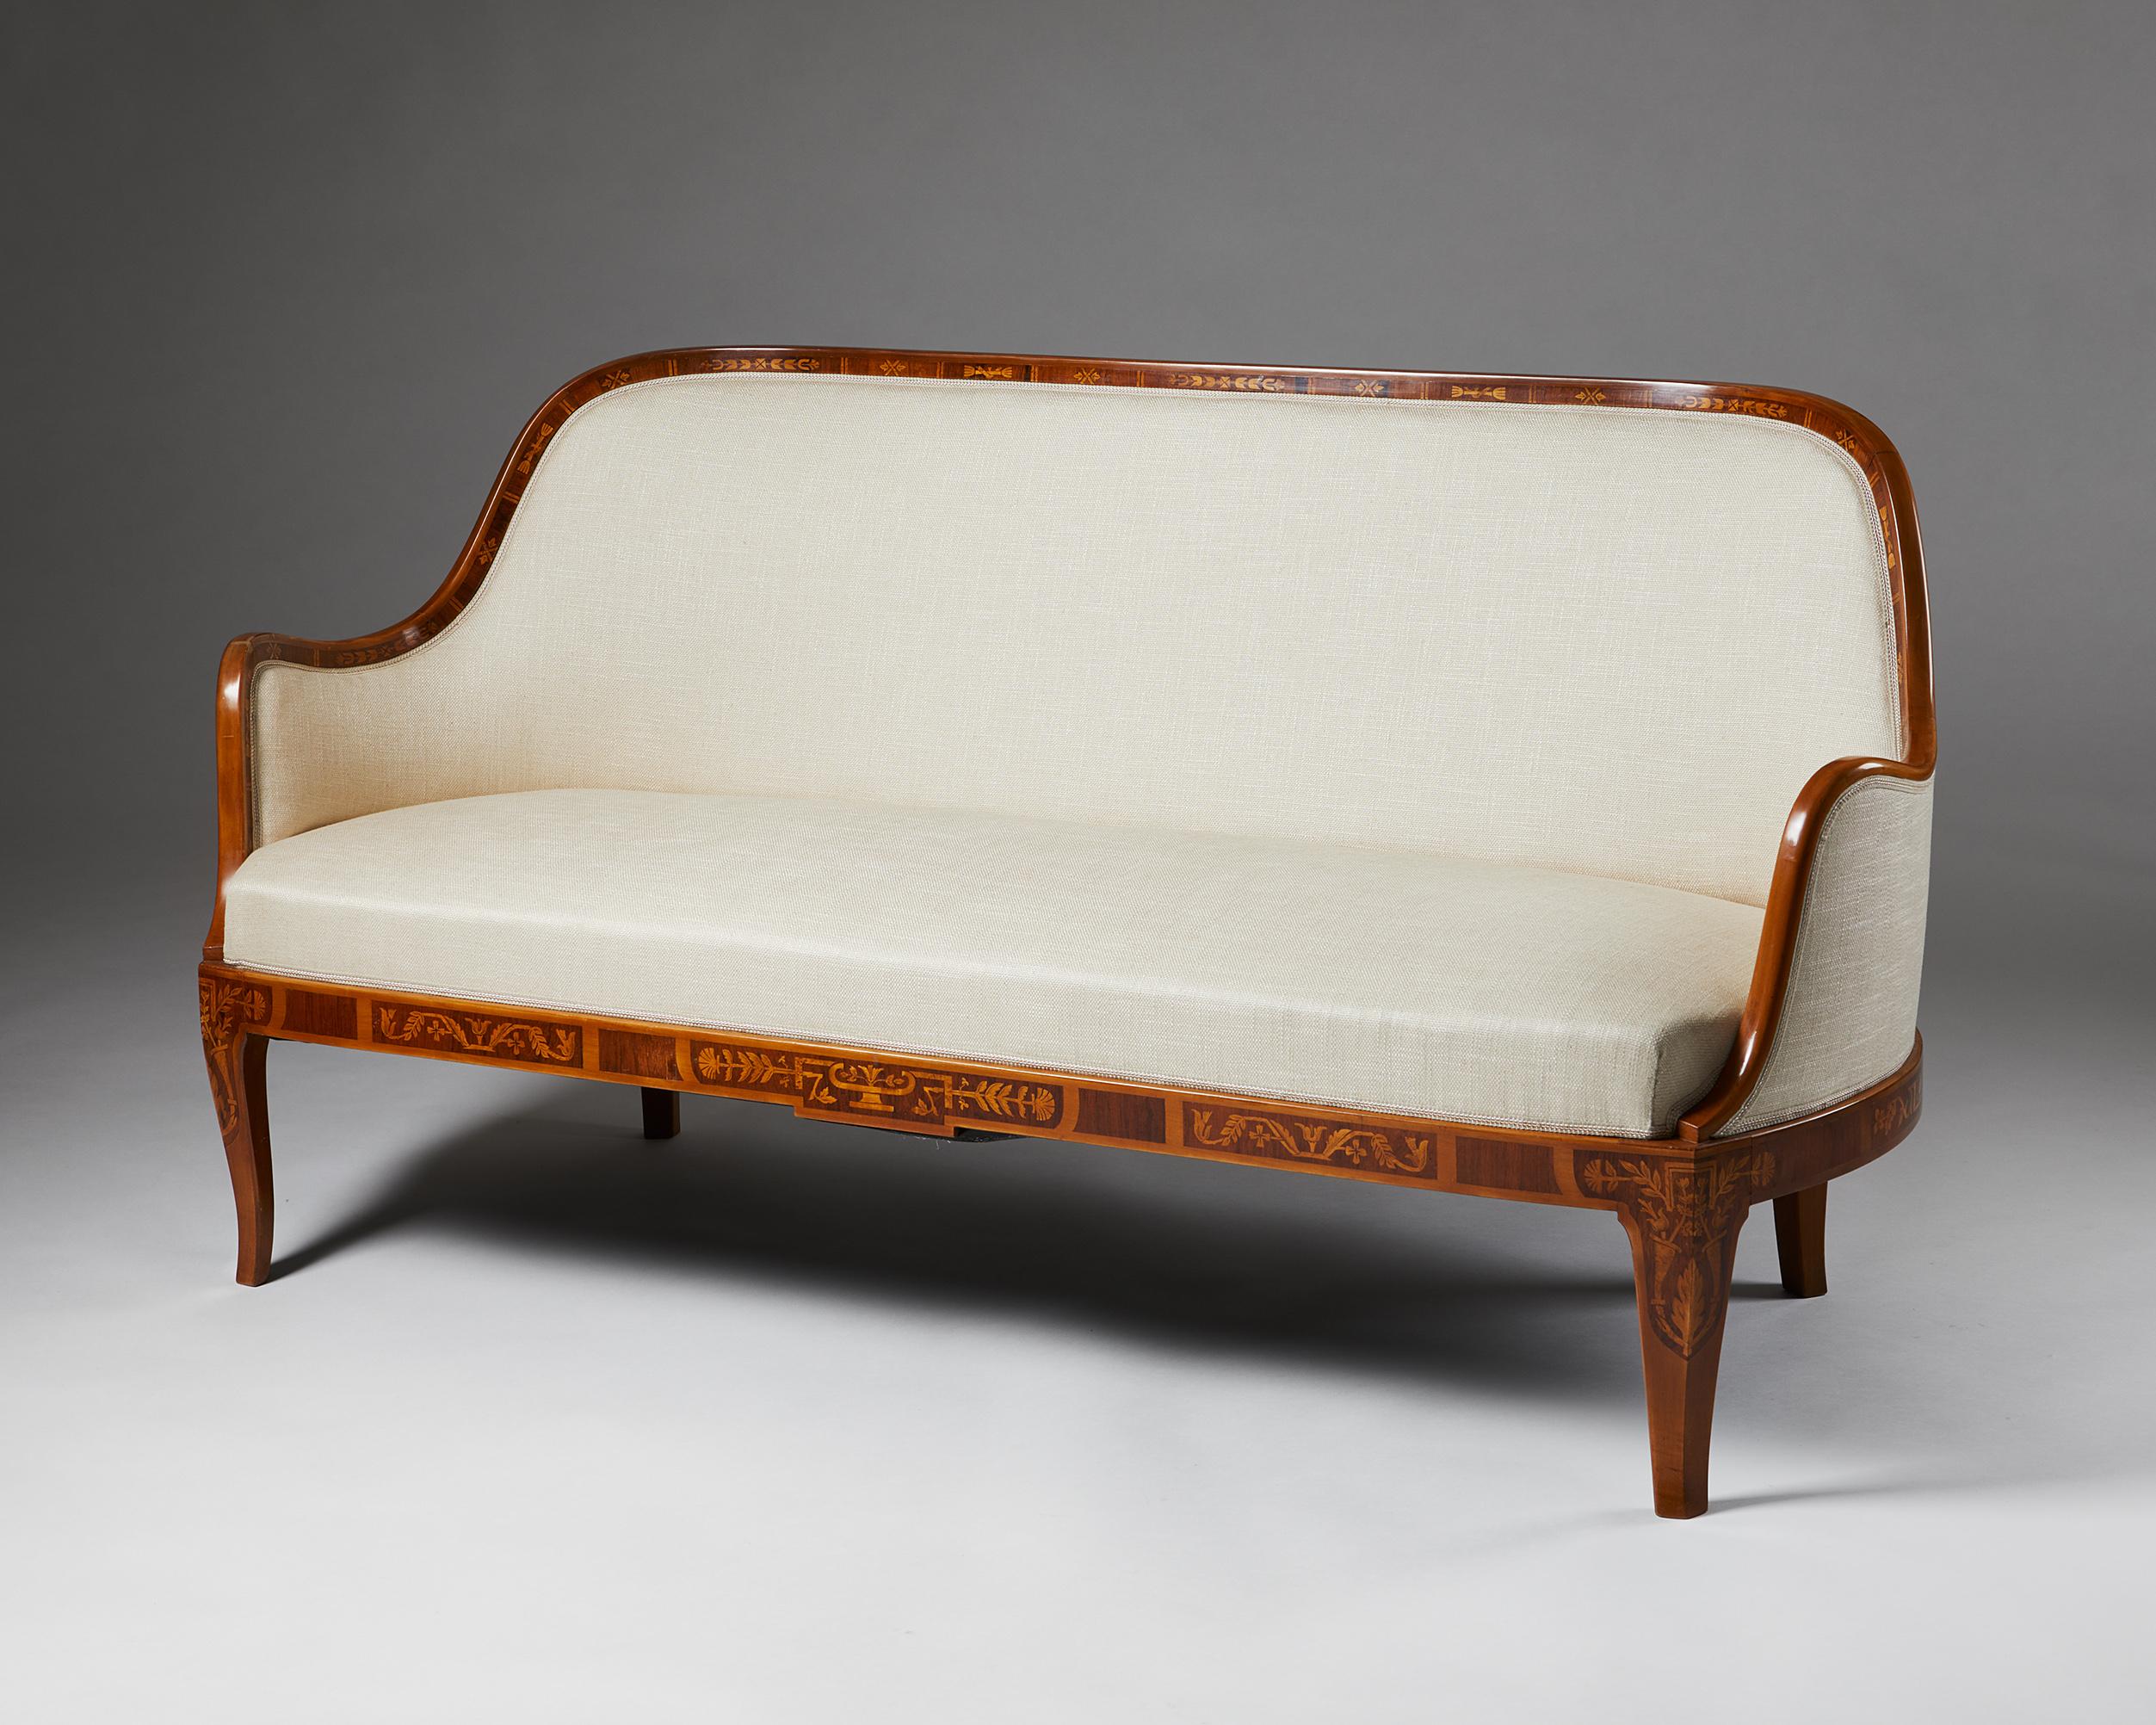 Swedish Grace sofa designed by Carl Malmsten, Sweden. 1929.

Mahogany frame with exotic wood inlay. Fabric upholstery.

Provenance: Commissioned by Erik Söderberg in 1929.

Exquisite inlays of exotic woods and a flowing shape characterise this